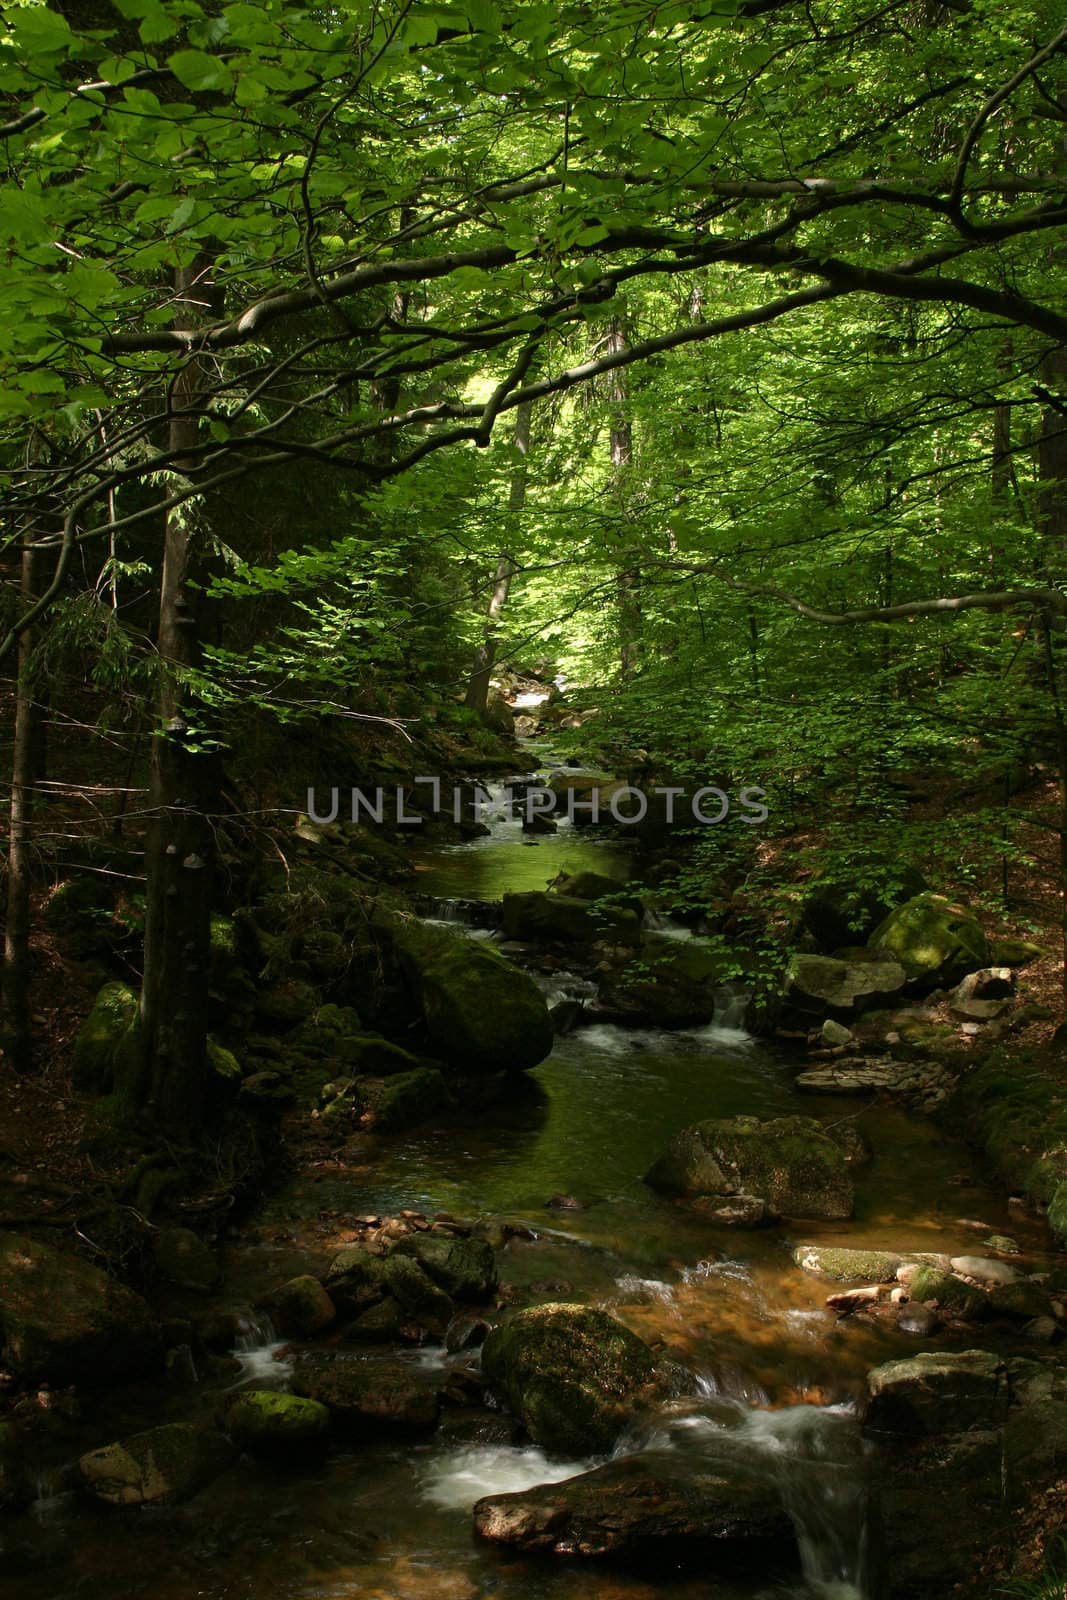 Mountain stream by tdietrich